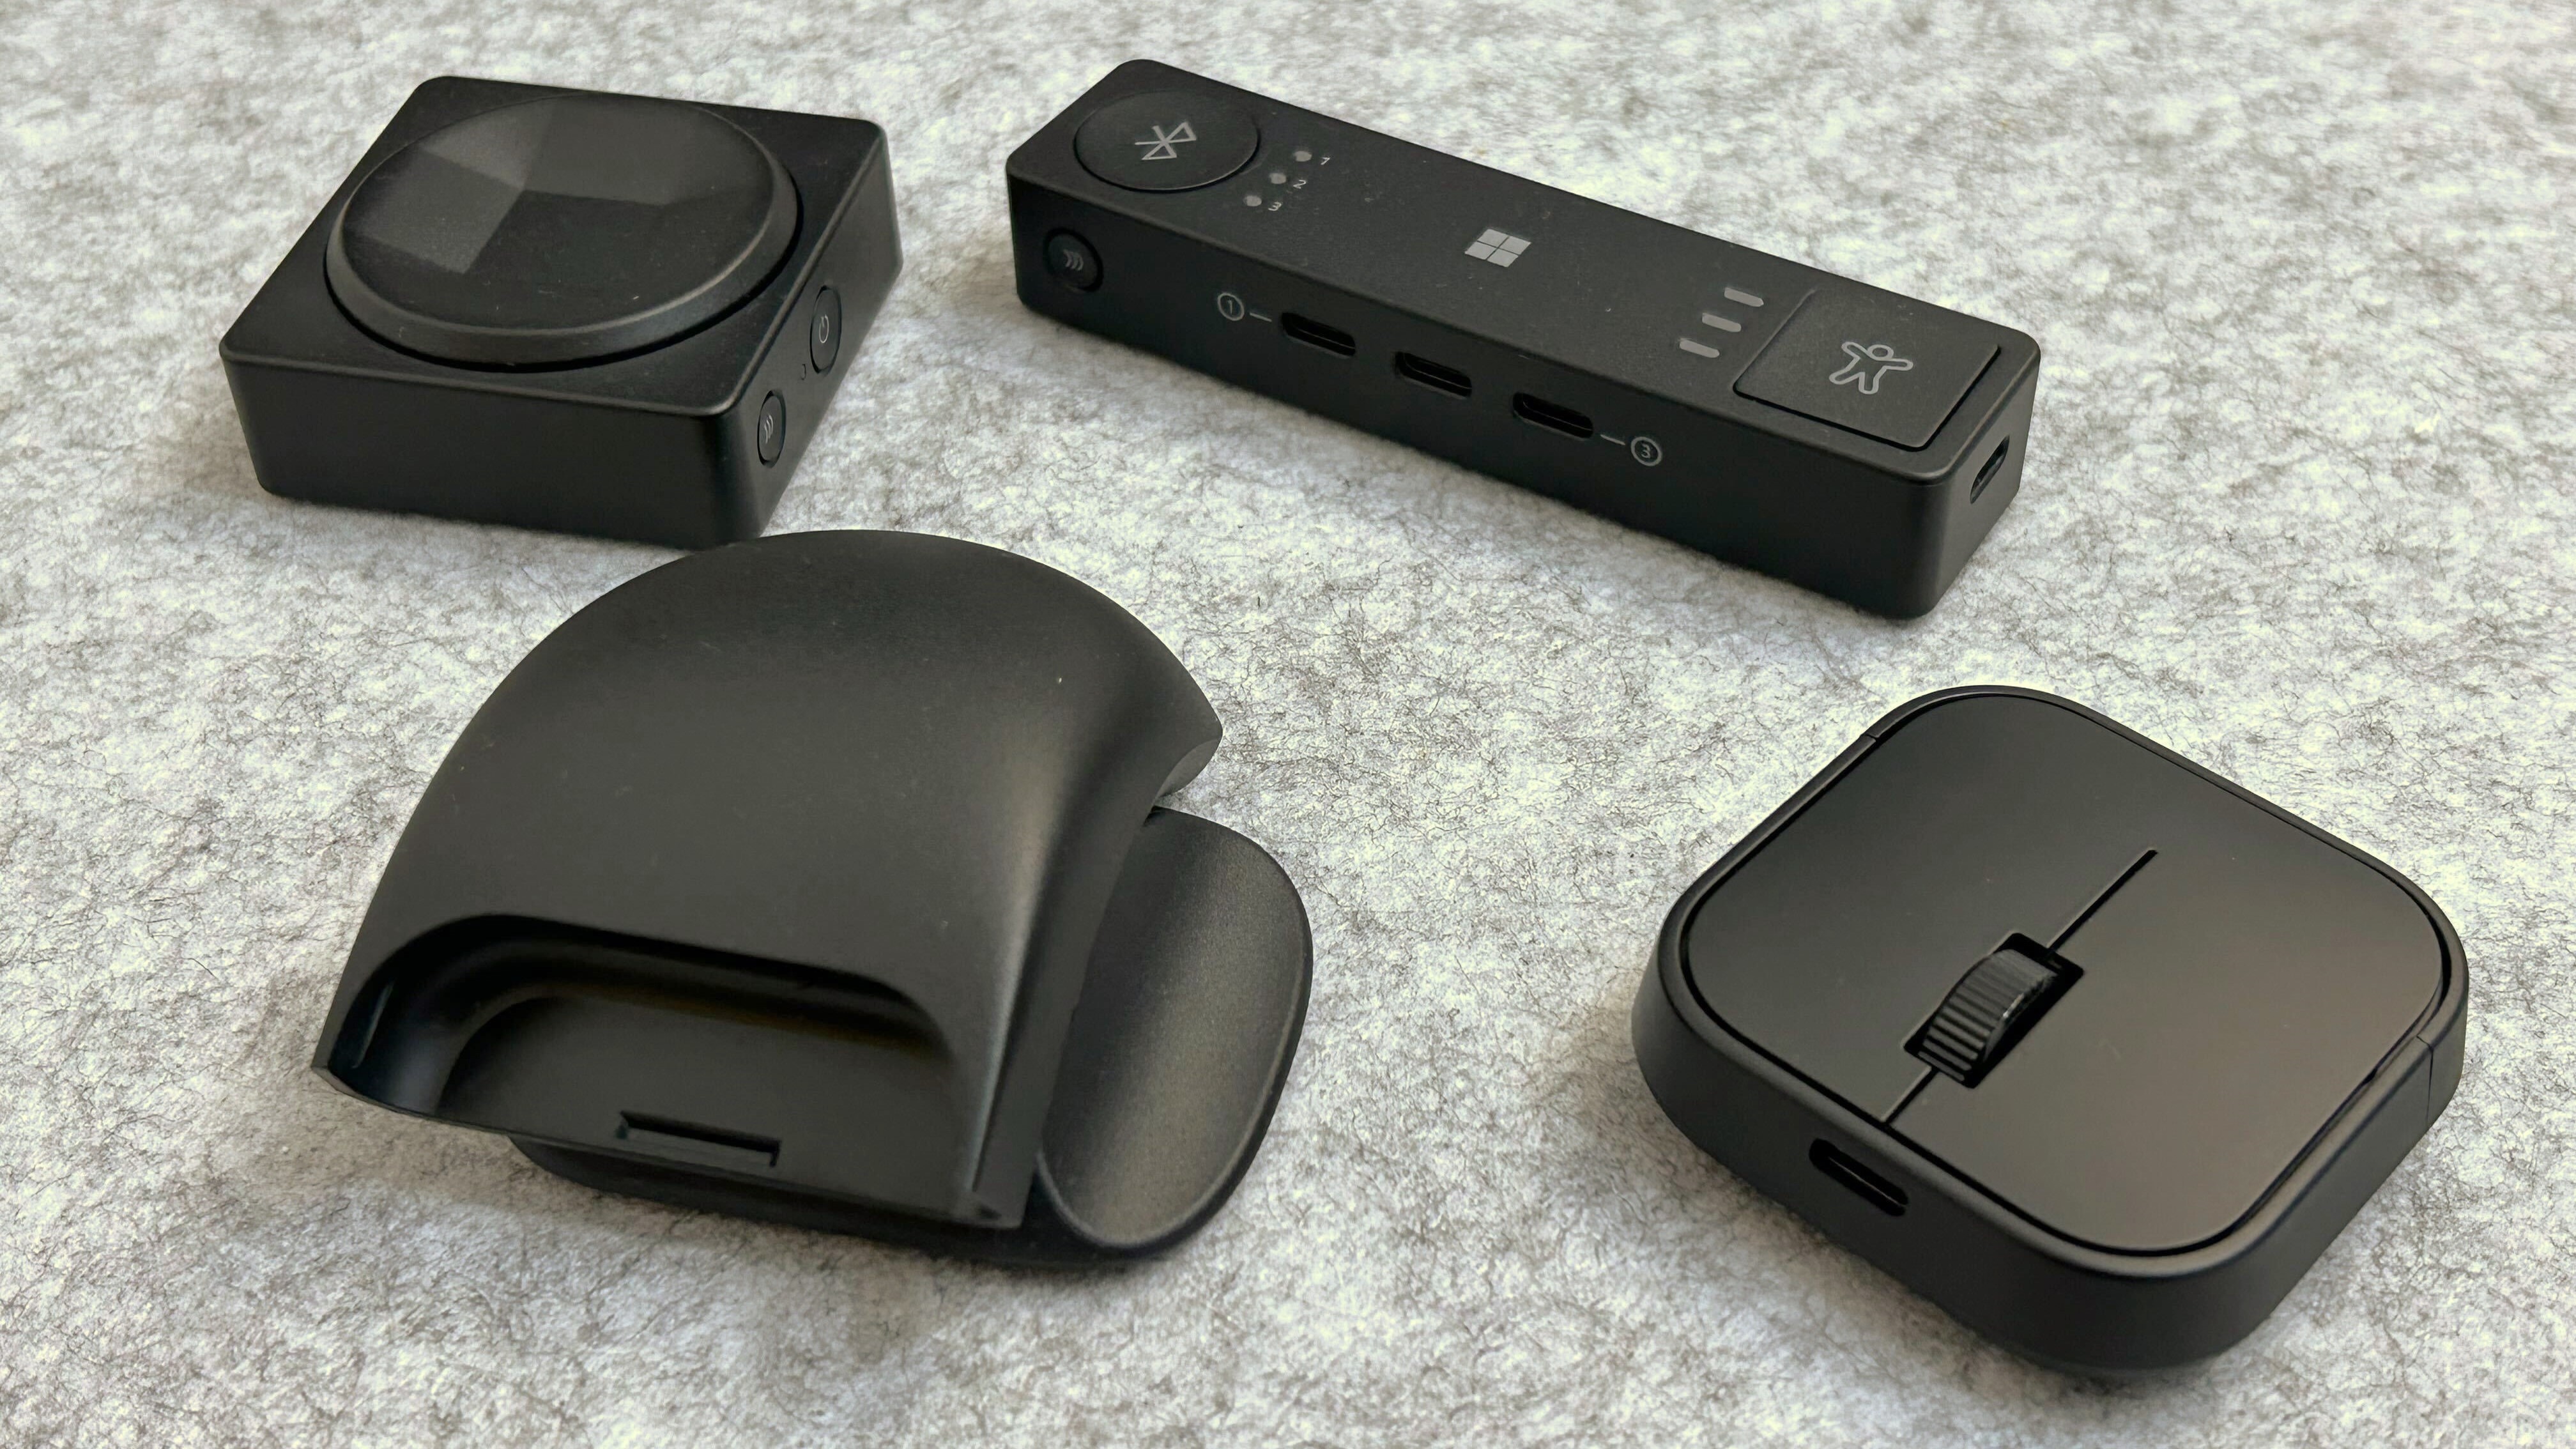 Microsoft Adaptive Mouse, Button, Hub: Details, Specs, Release Date